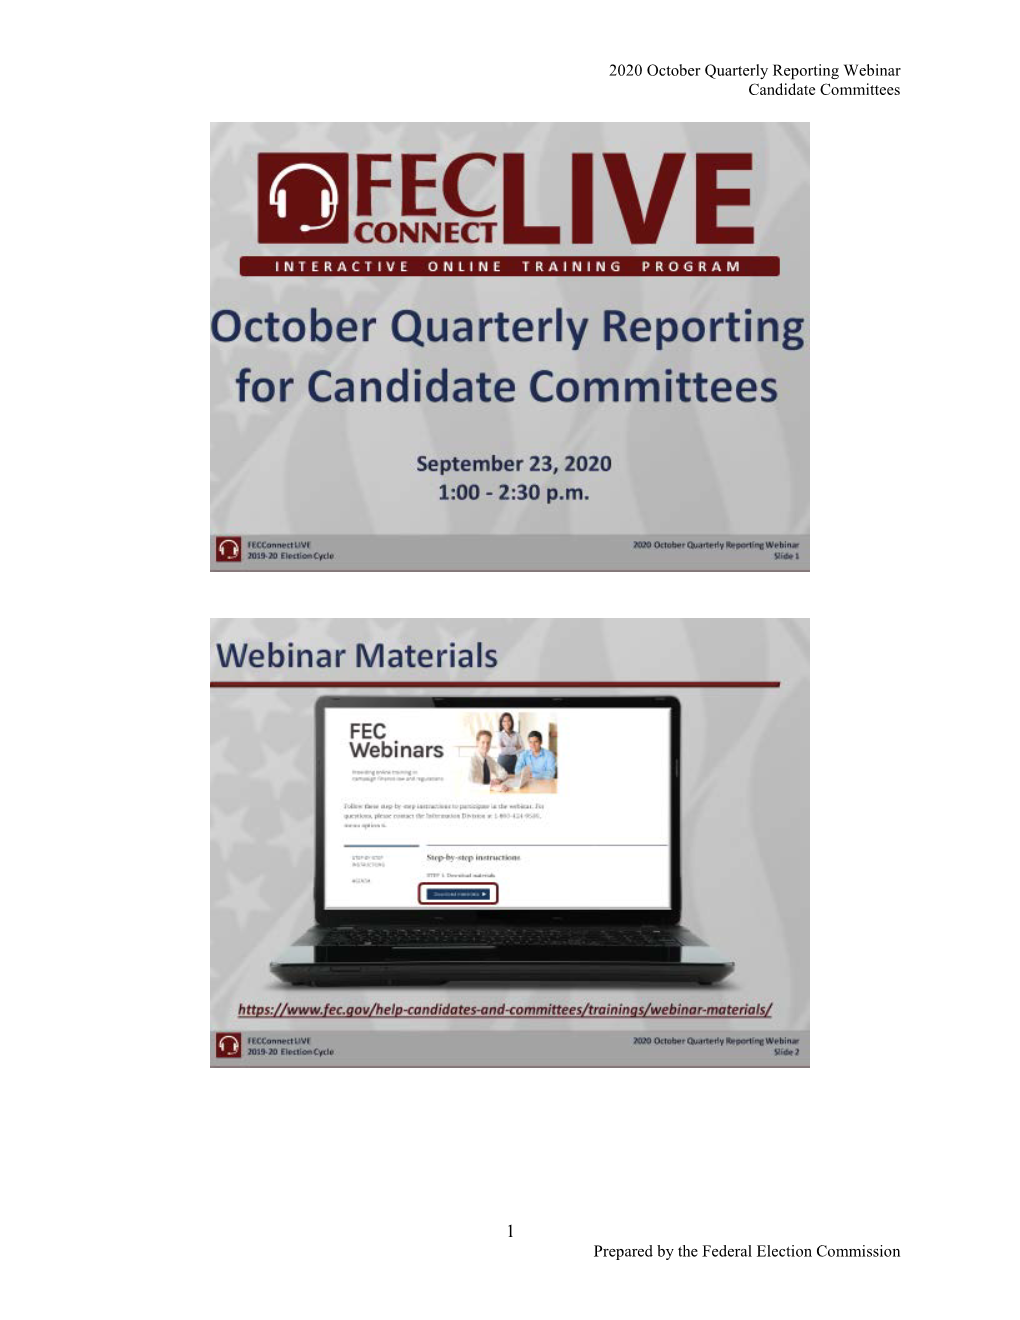 September 23 Reporting for Candidate Committees Webinar